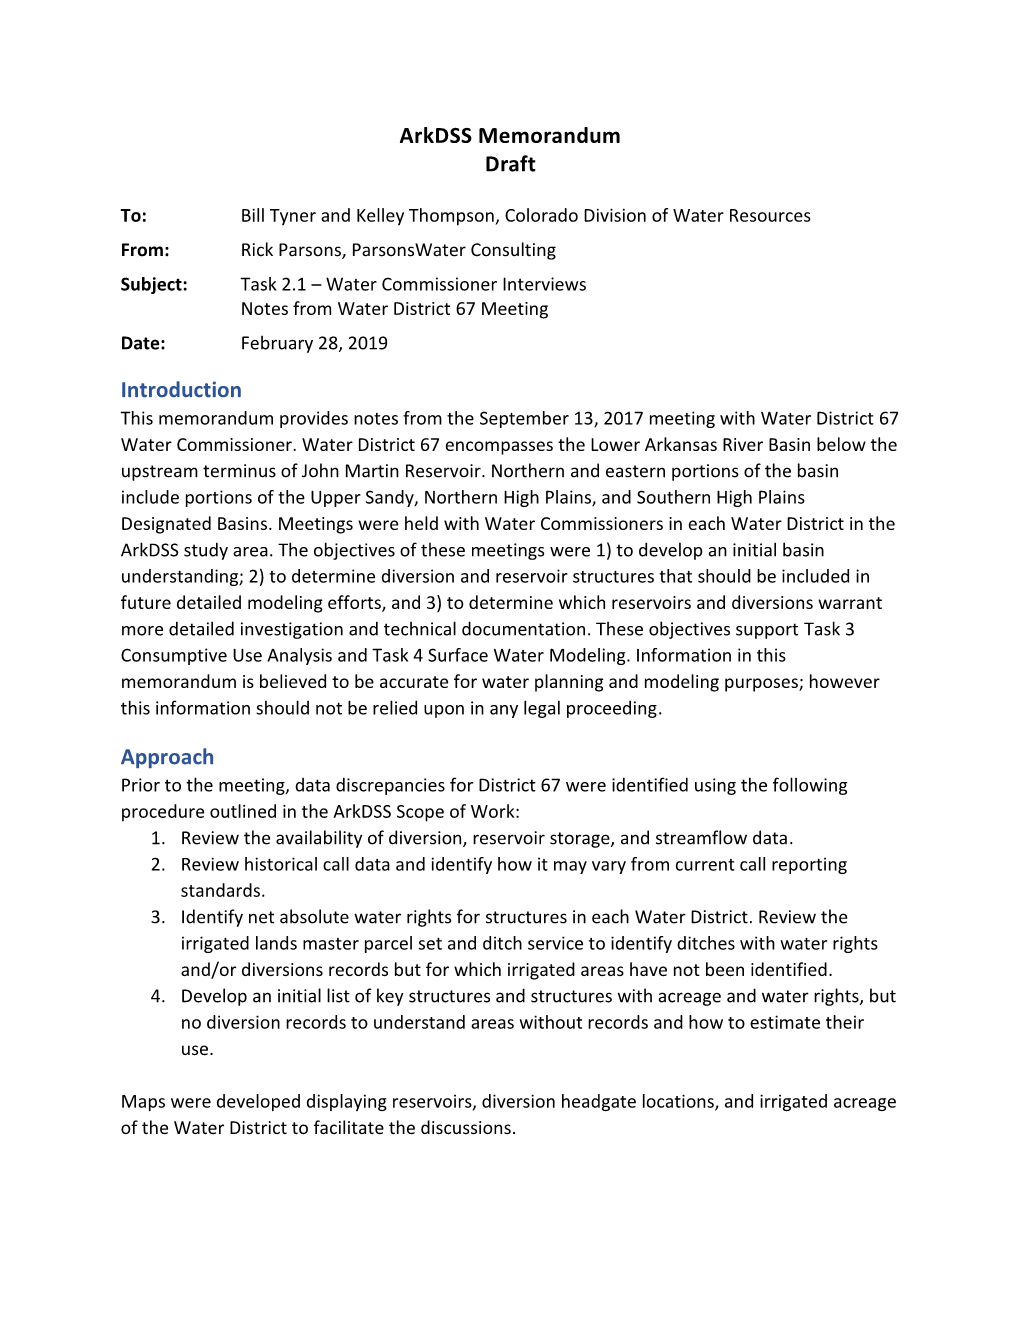 Water District 67 Meeting Date: February 28, 2019